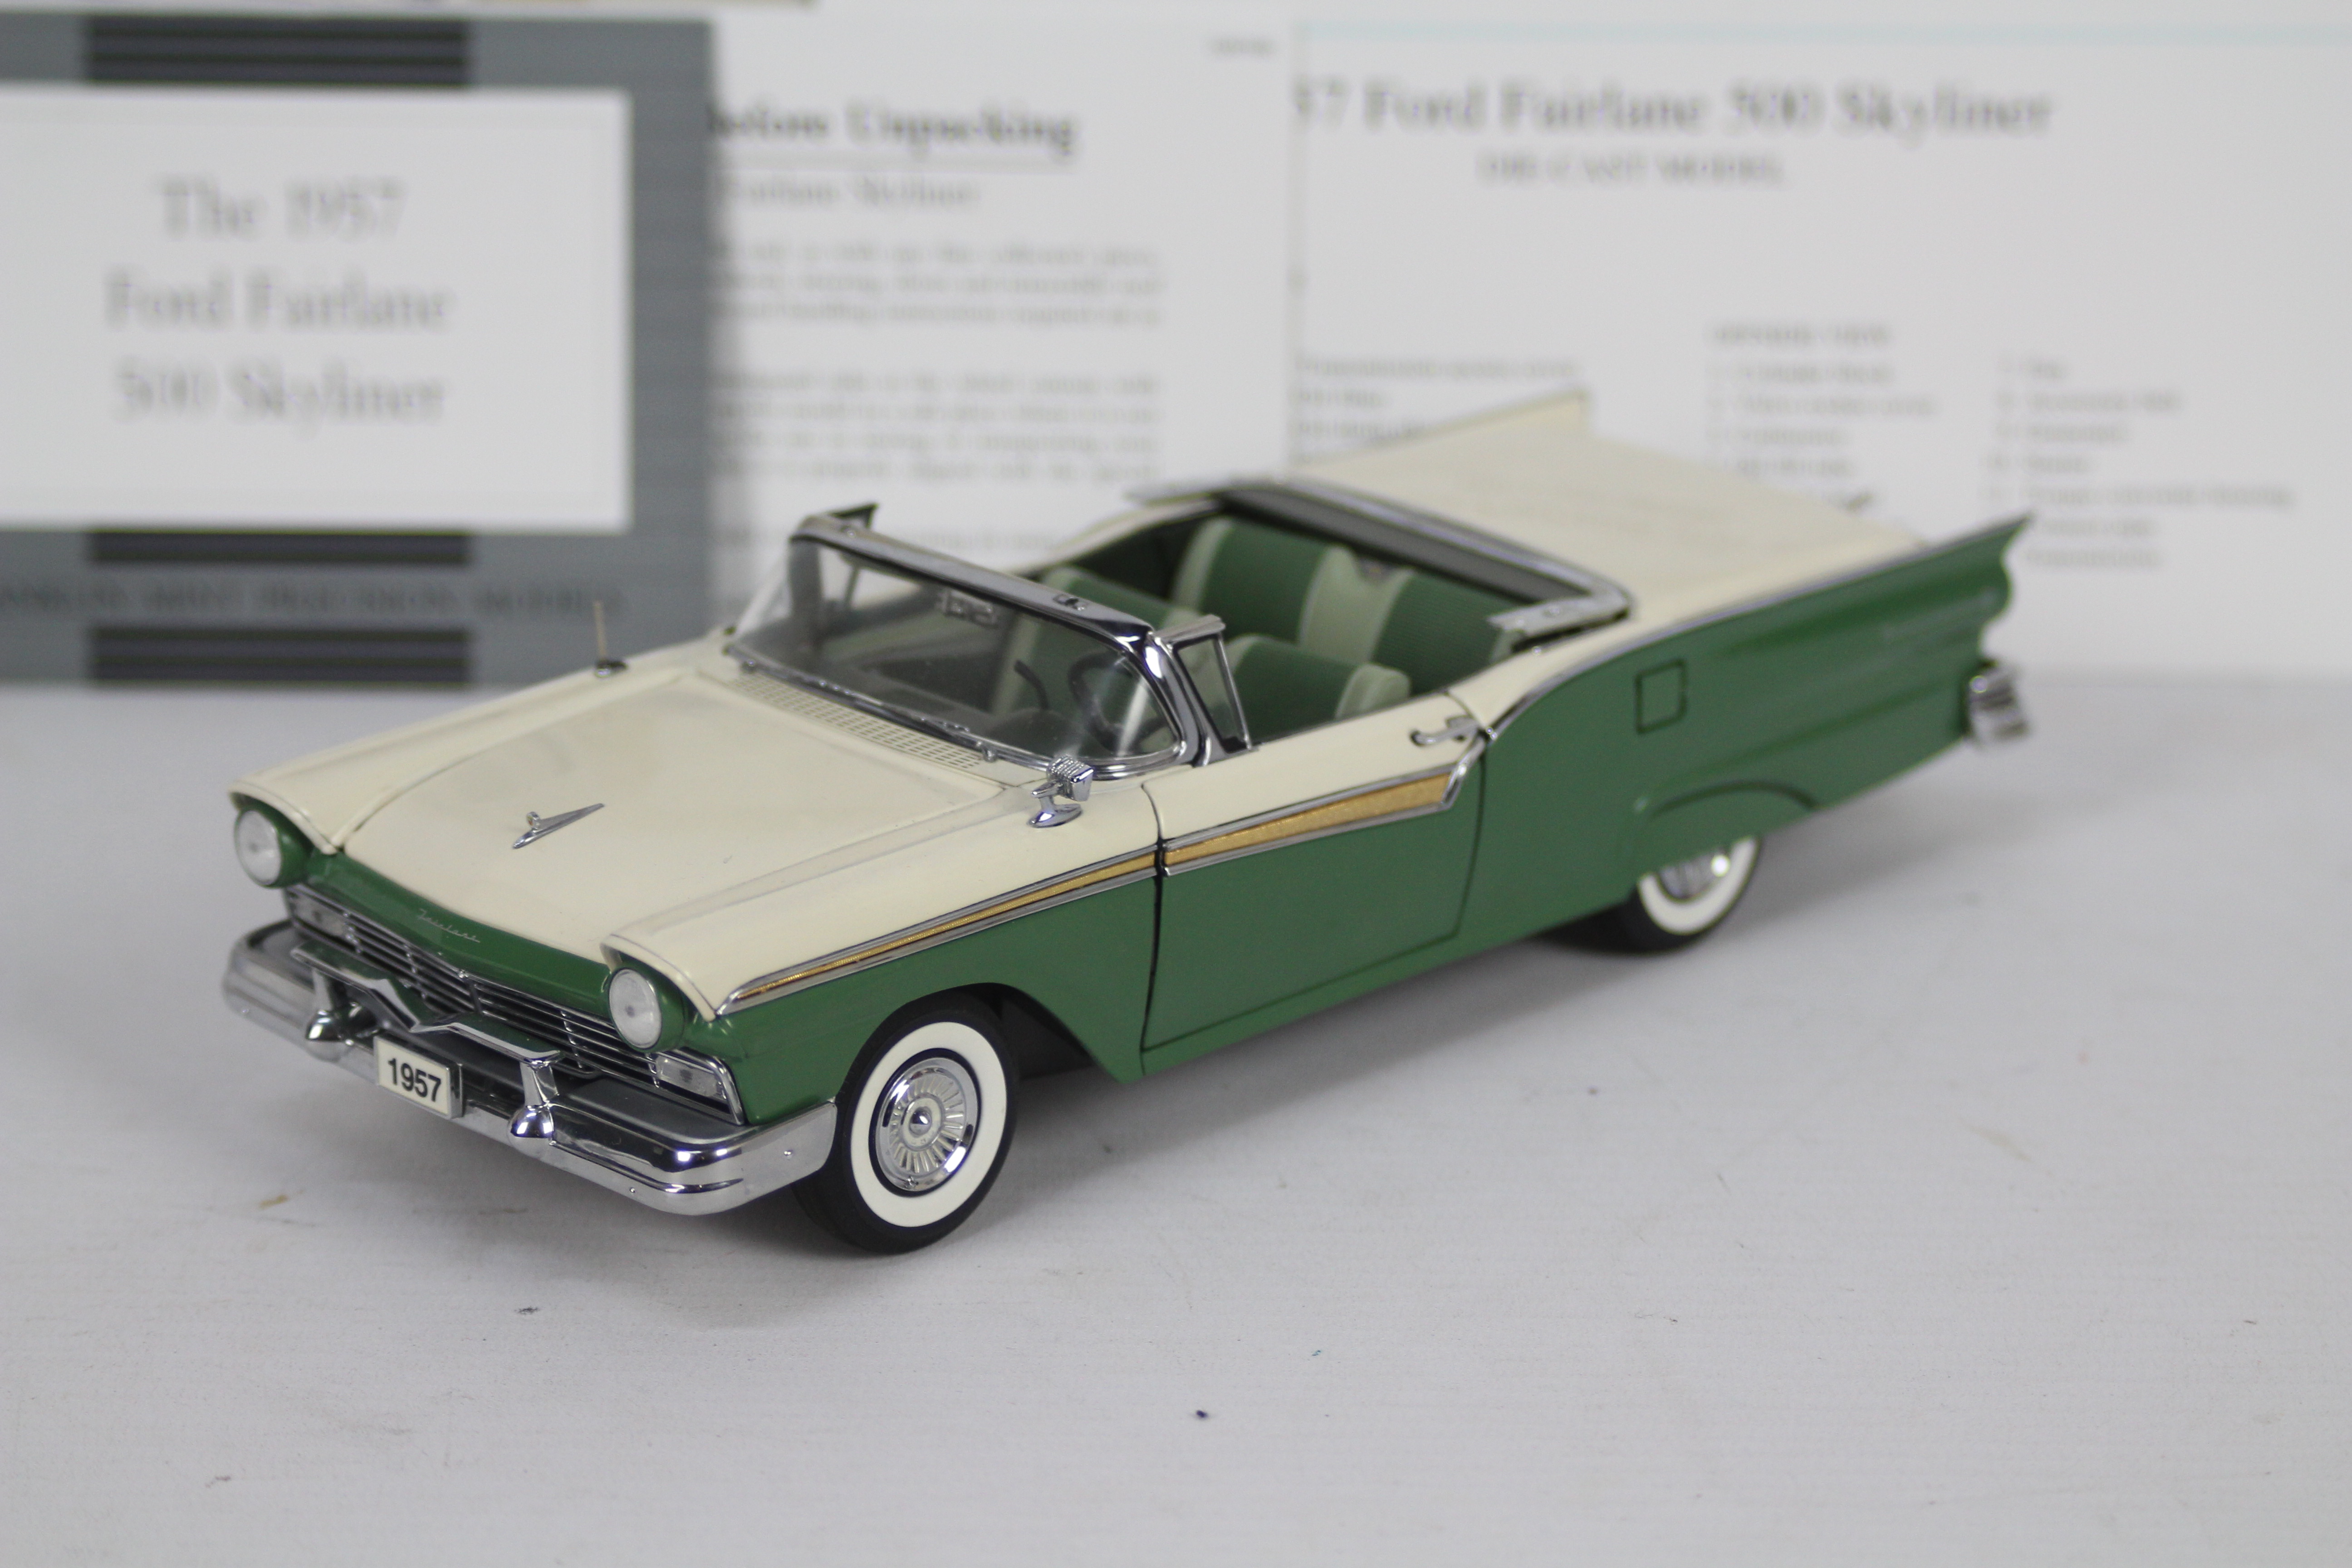 Franklin Mint - A boxed 1:24 scale 1957 Ford Fairlane 500 Skyliner by Franklin Mint. - Image 2 of 5